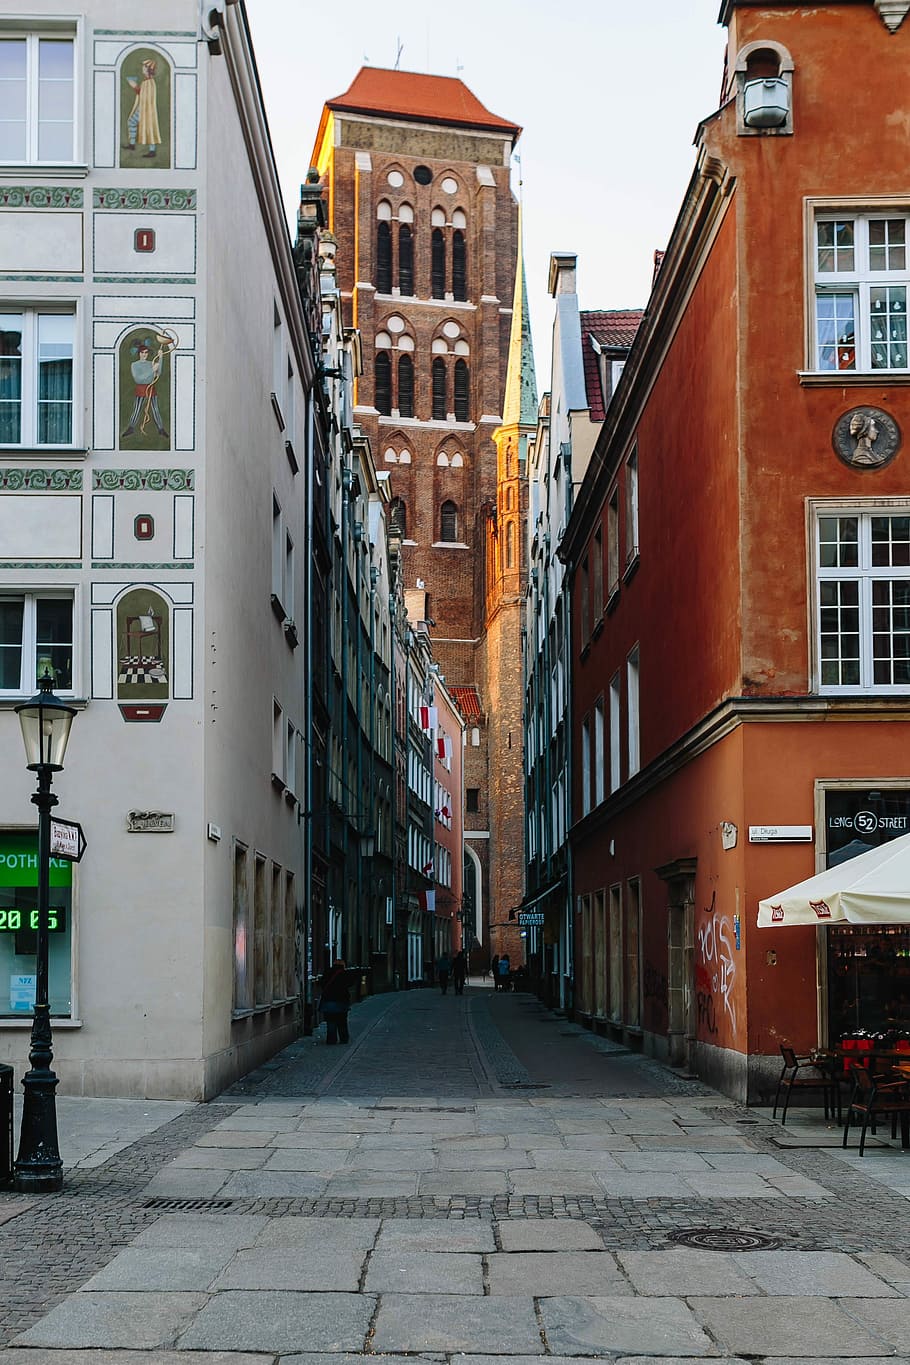 Photos of Gdansk, Poland, architecture, old town, tenement house